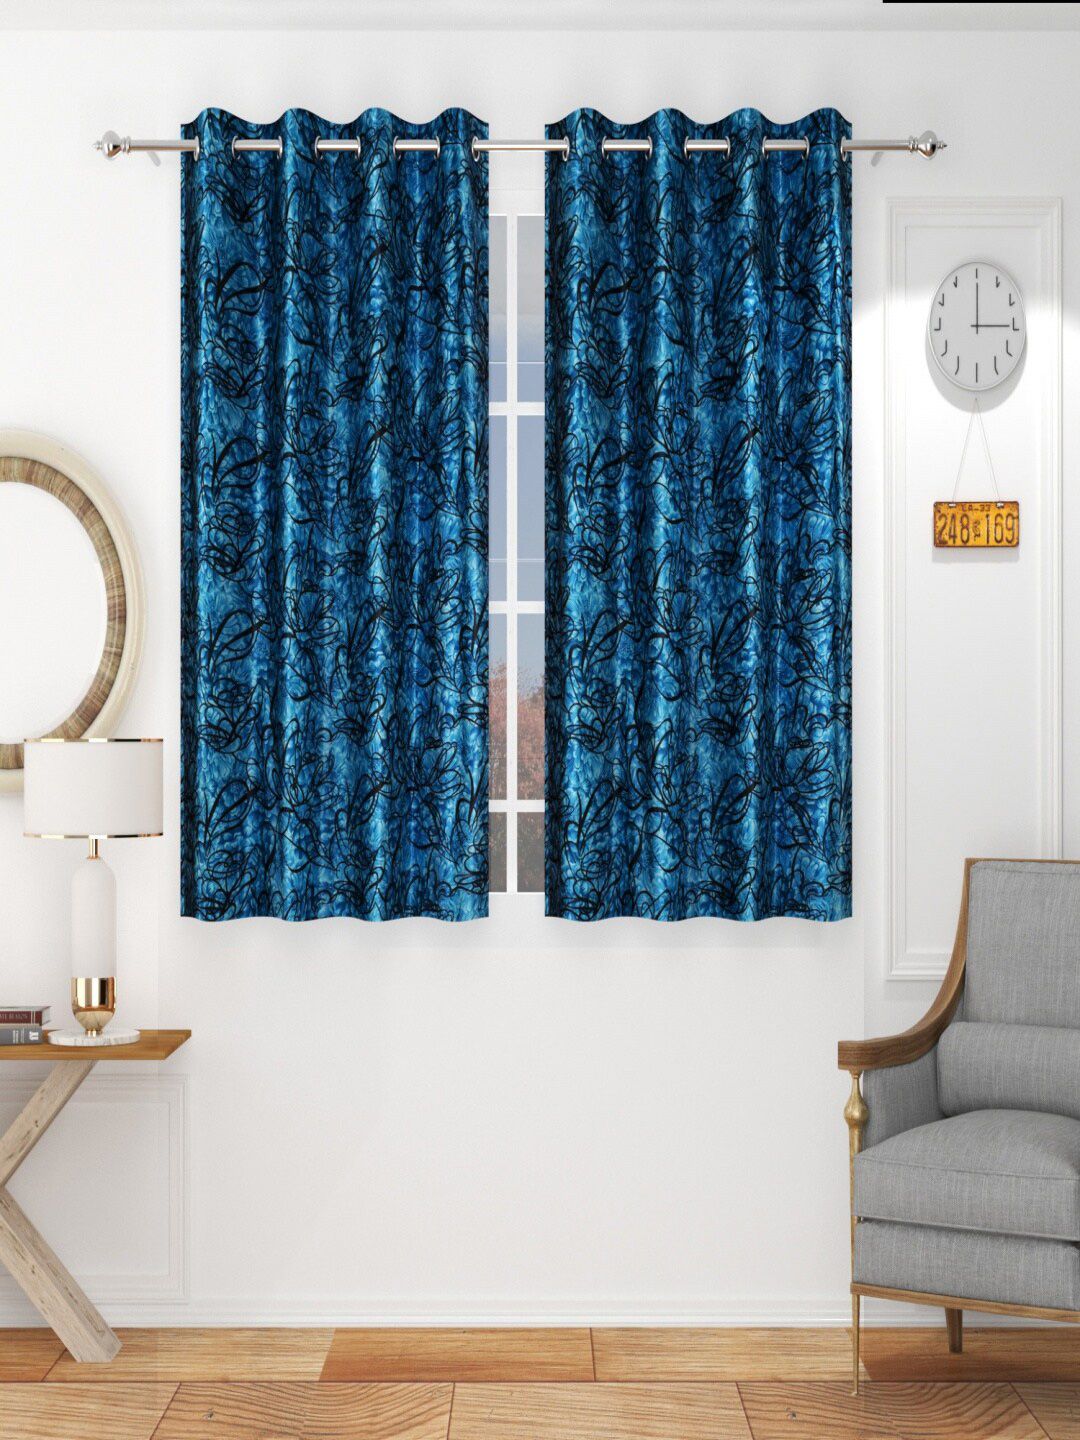 Homefab India Blue Set of 2 Window Curtain Price in India